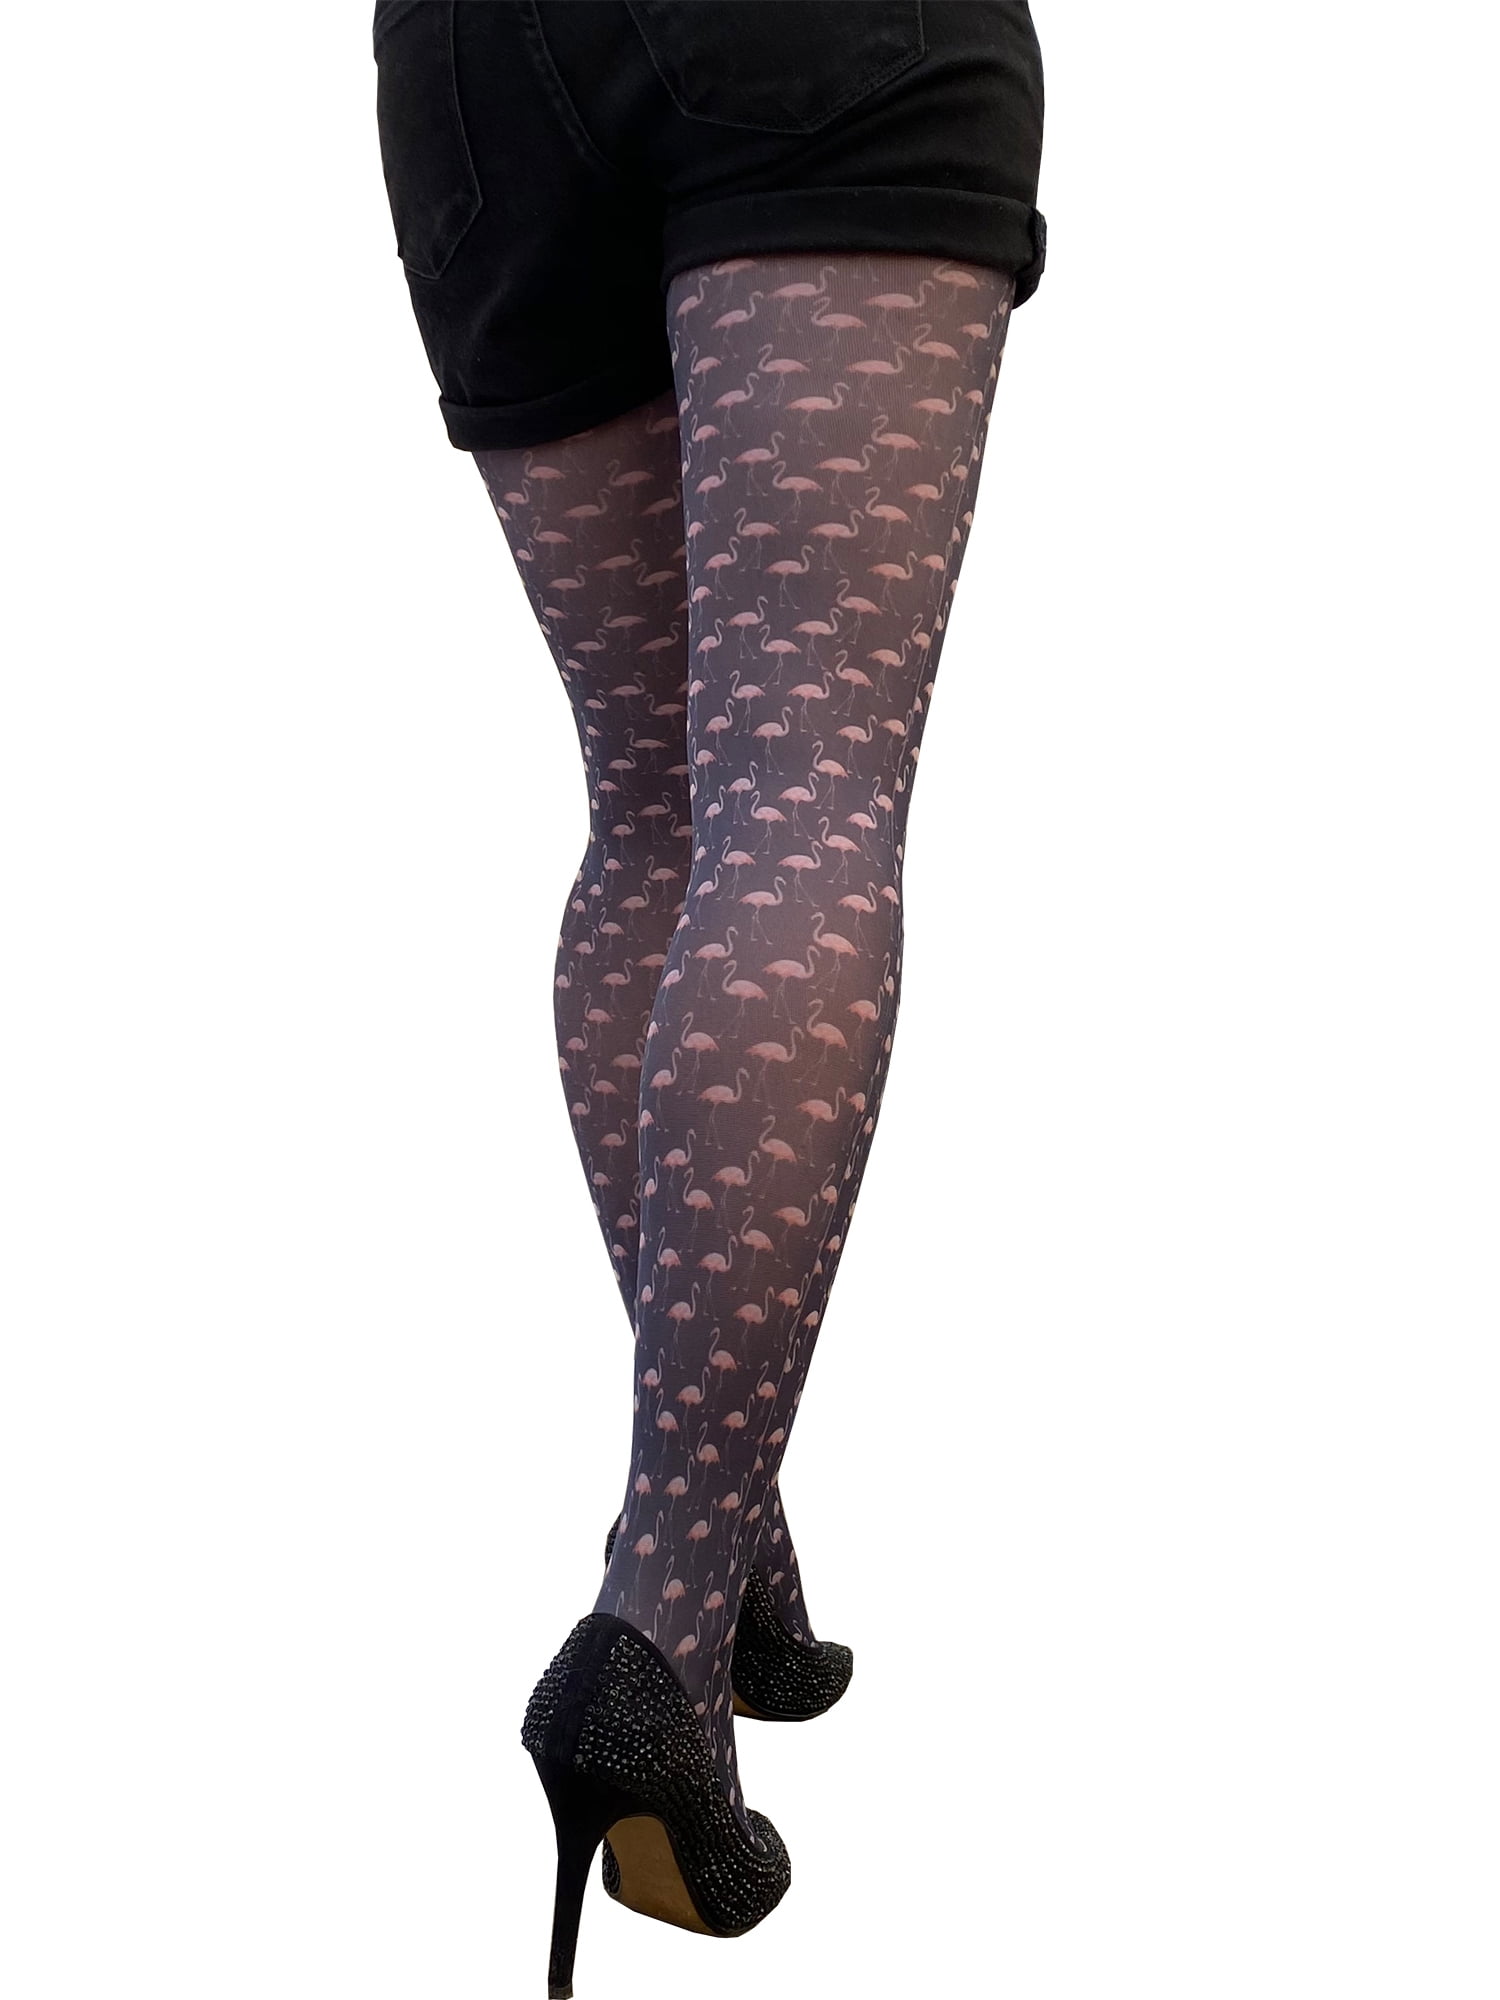 HOT TOPIC FASHION BLACK OPAQUE SHEER STRIPE FOOTED PANTYHOSE TIGHTS IN ML SIZE 